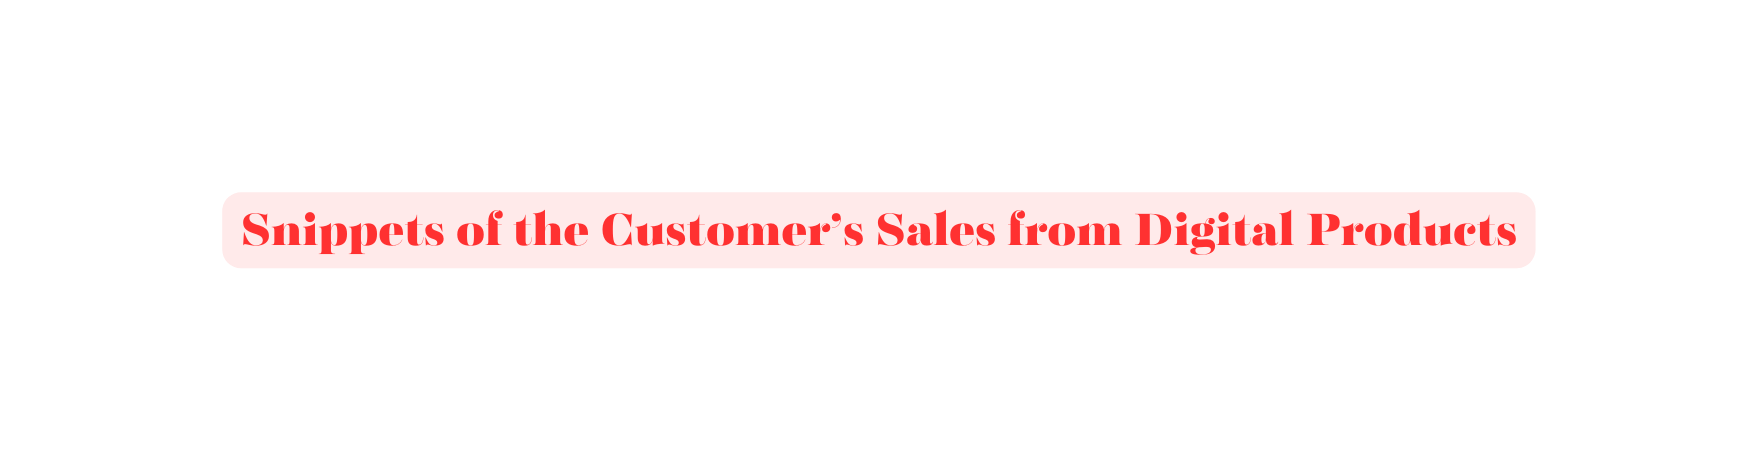 Snippets of the Customer s Sales from Digital Products